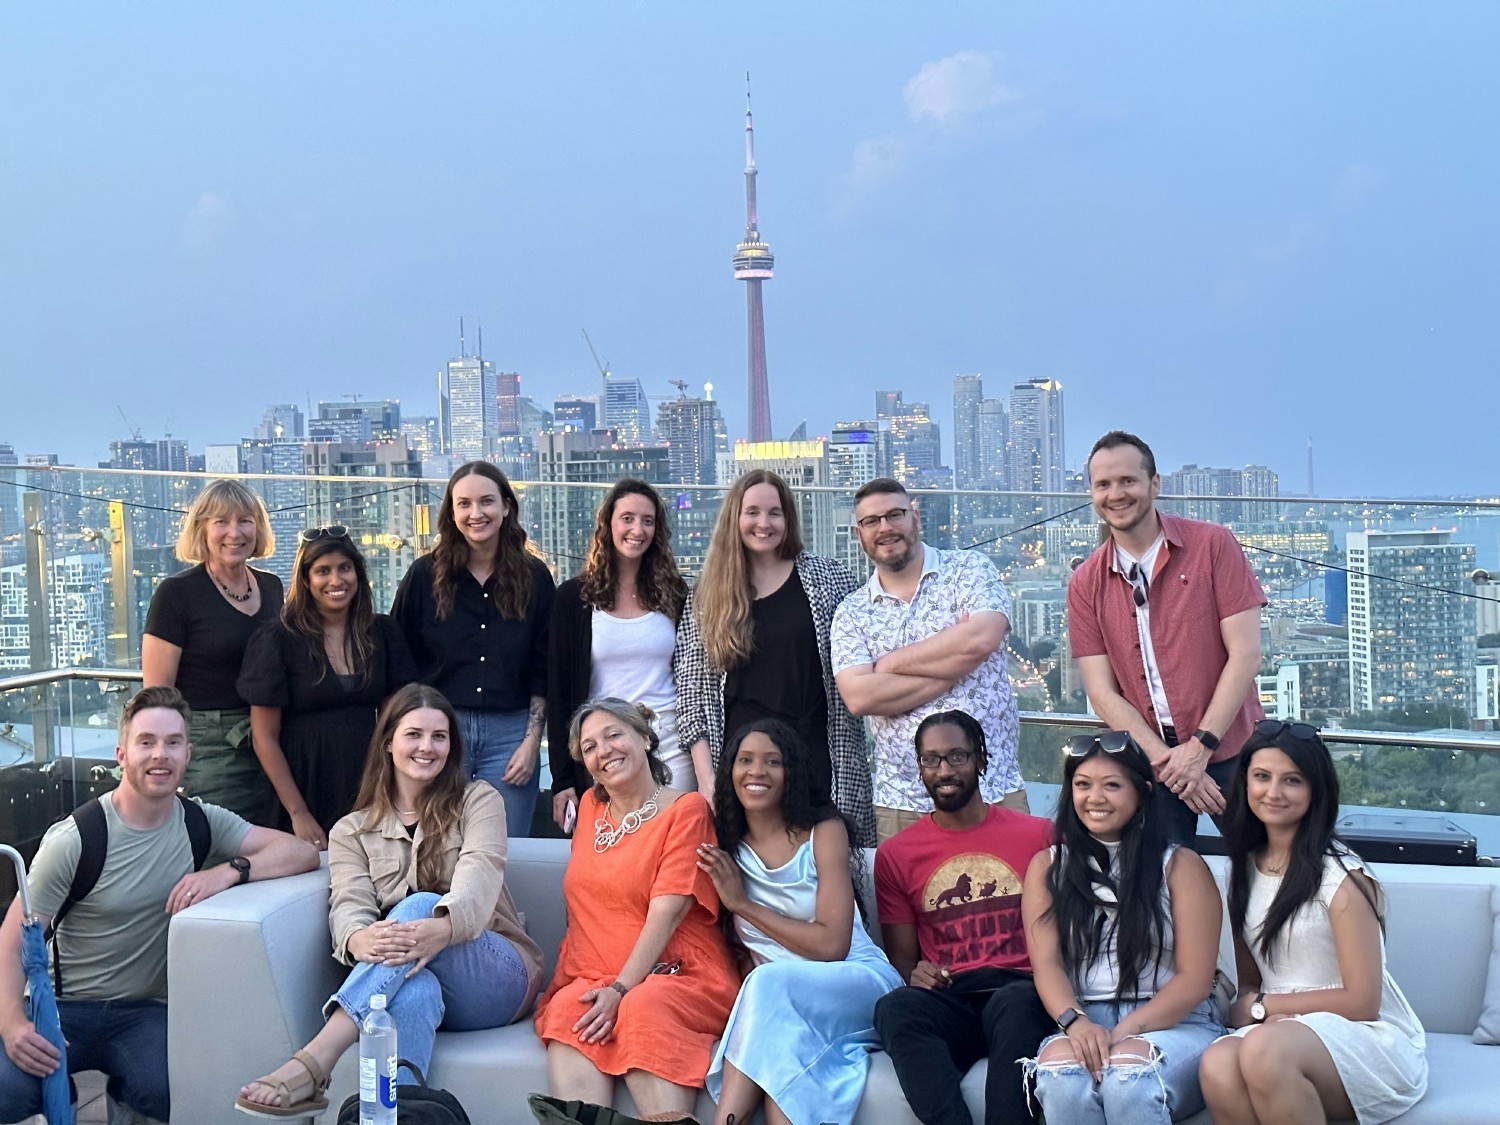 Our team at a Toronto offsite!